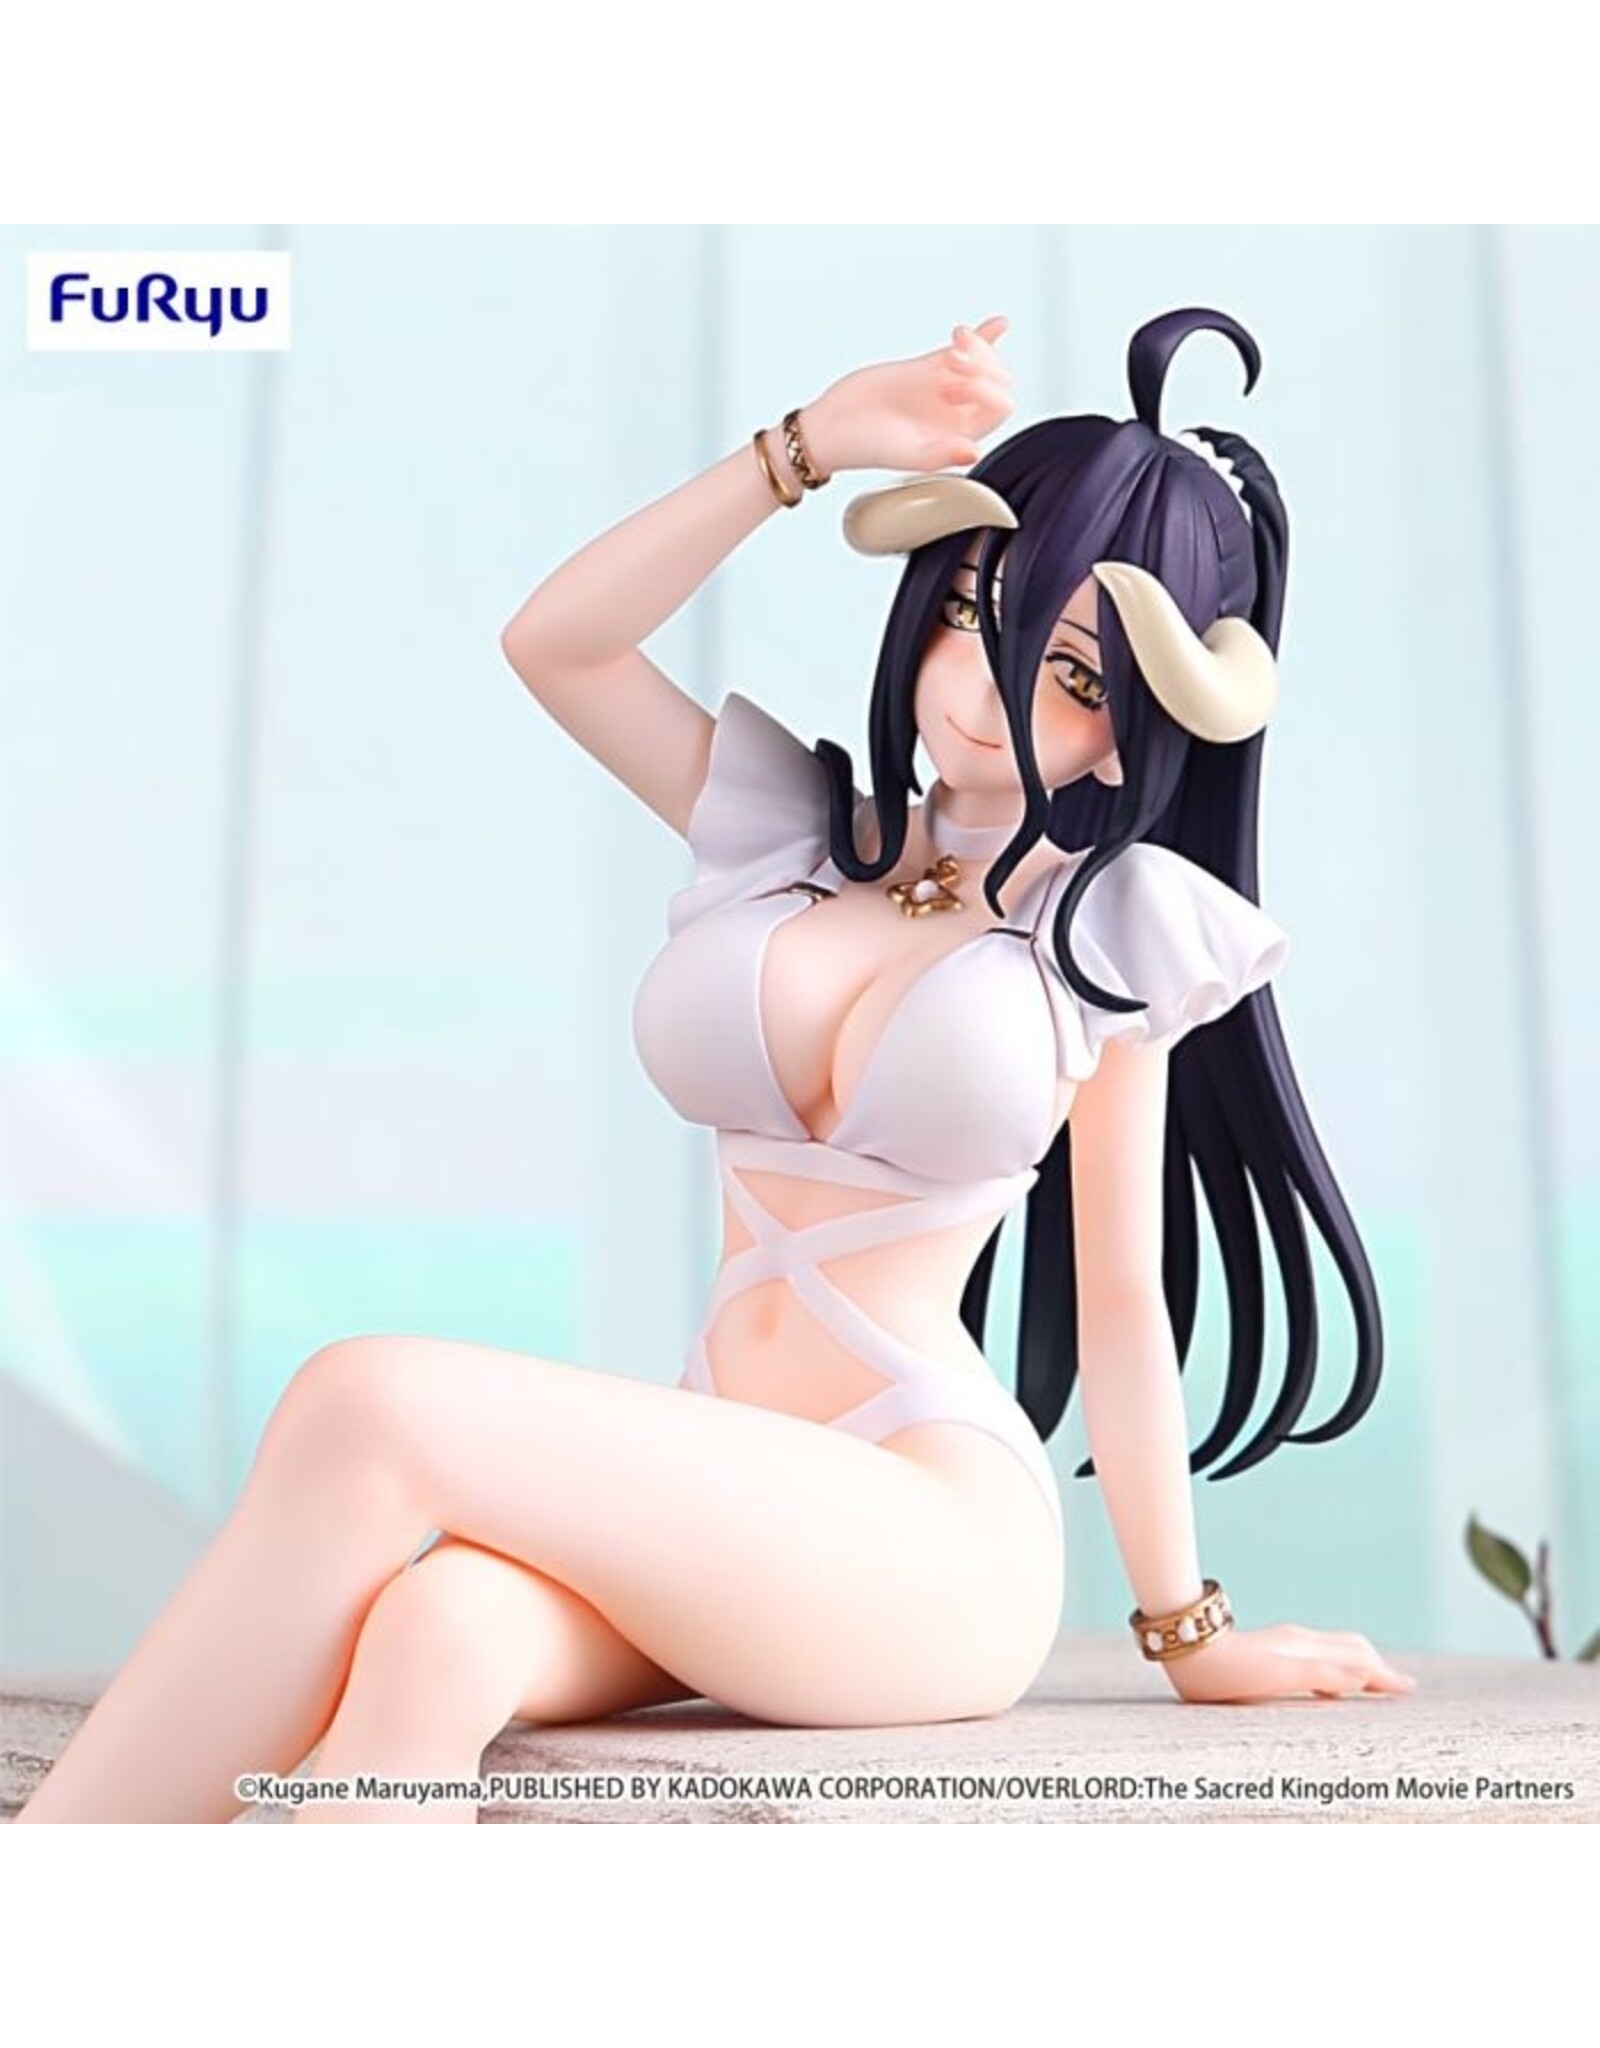 Overlord Albedo Swimsuit Ver. Noodle Stopper Figure *Pre-order*